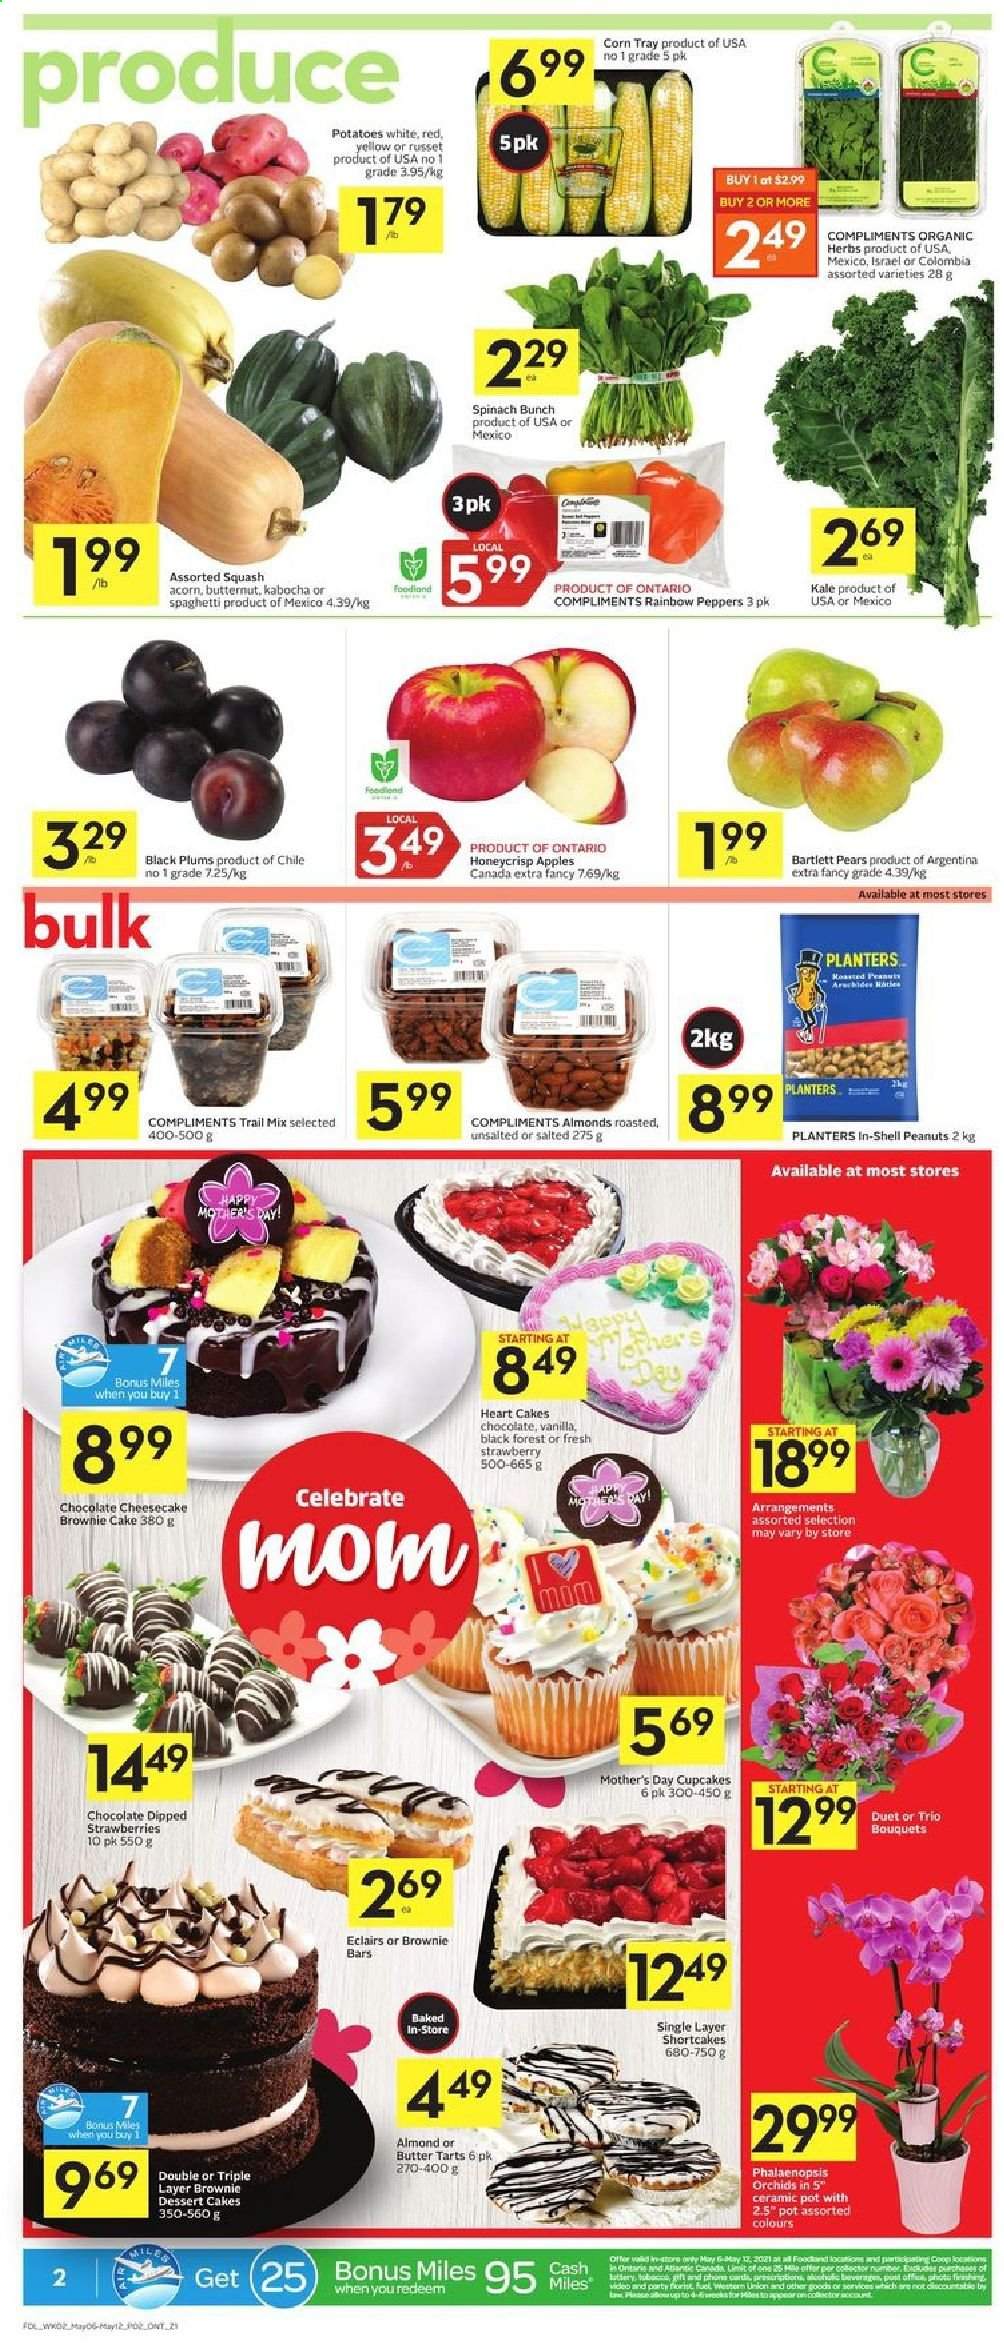 thumbnail - Foodland Flyer - May 06, 2021 - May 12, 2021 - Sales products - cake, cupcake, cheesecake, brownies, butternut squash, corn, russet potatoes, kale, potatoes, pumpkin, peppers, apples, Bartlett pears, plums, pears, black plums, butter, chocolate, herbs, almonds, peanuts, Planters, trail mix. Page 2.